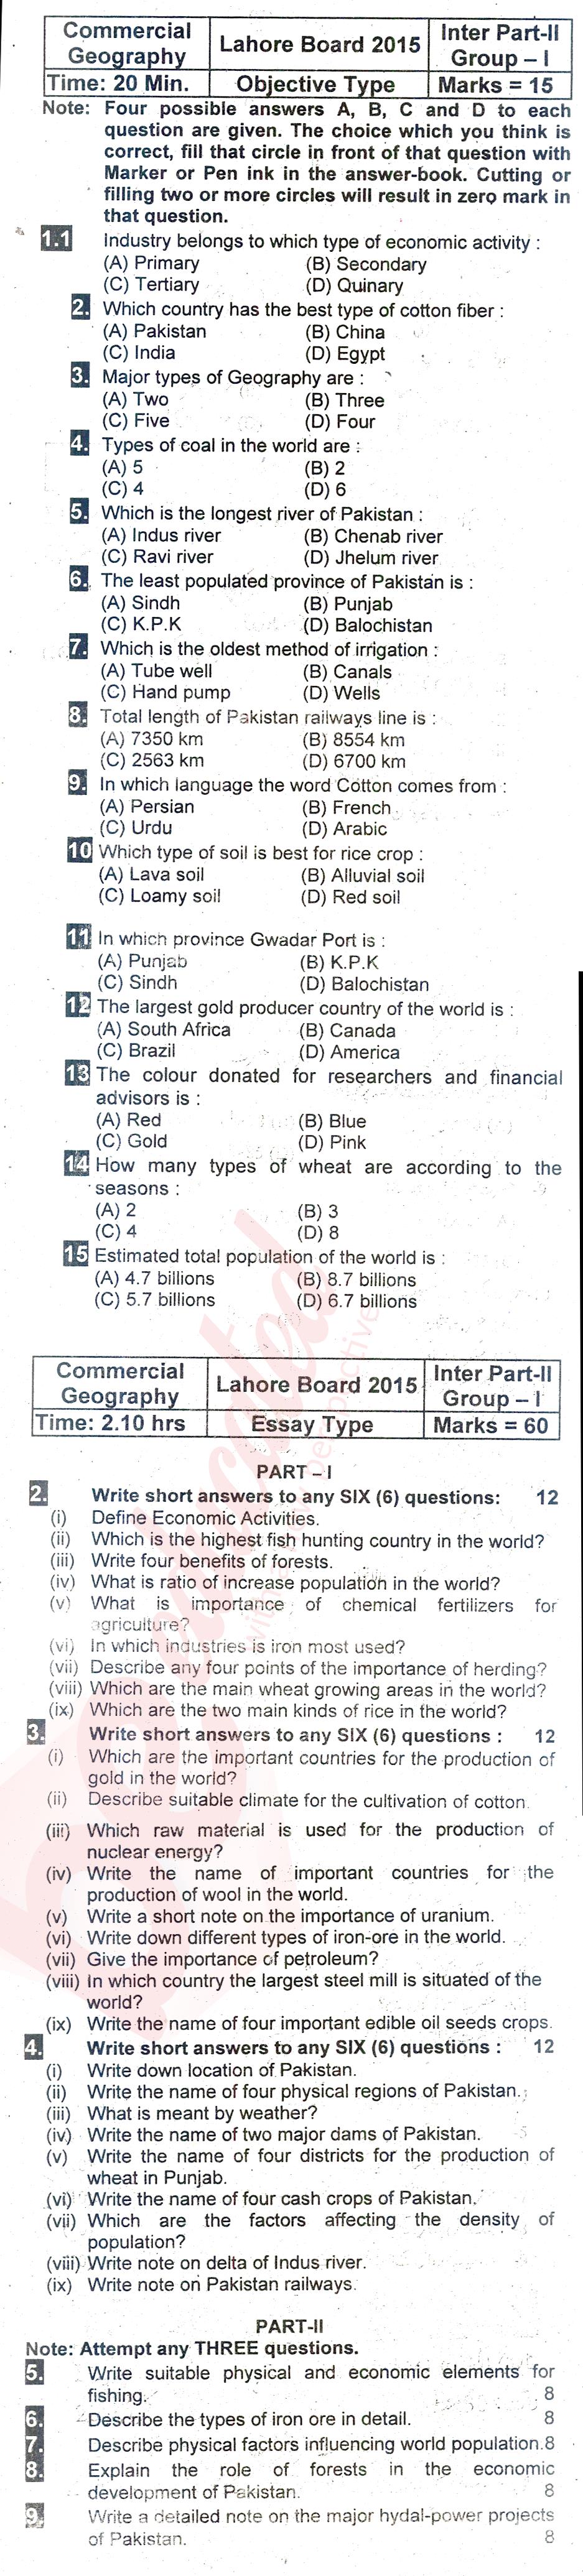 Commercial Geography ICOM Part 2 Past Paper Group 1 BISE Lahore 2015